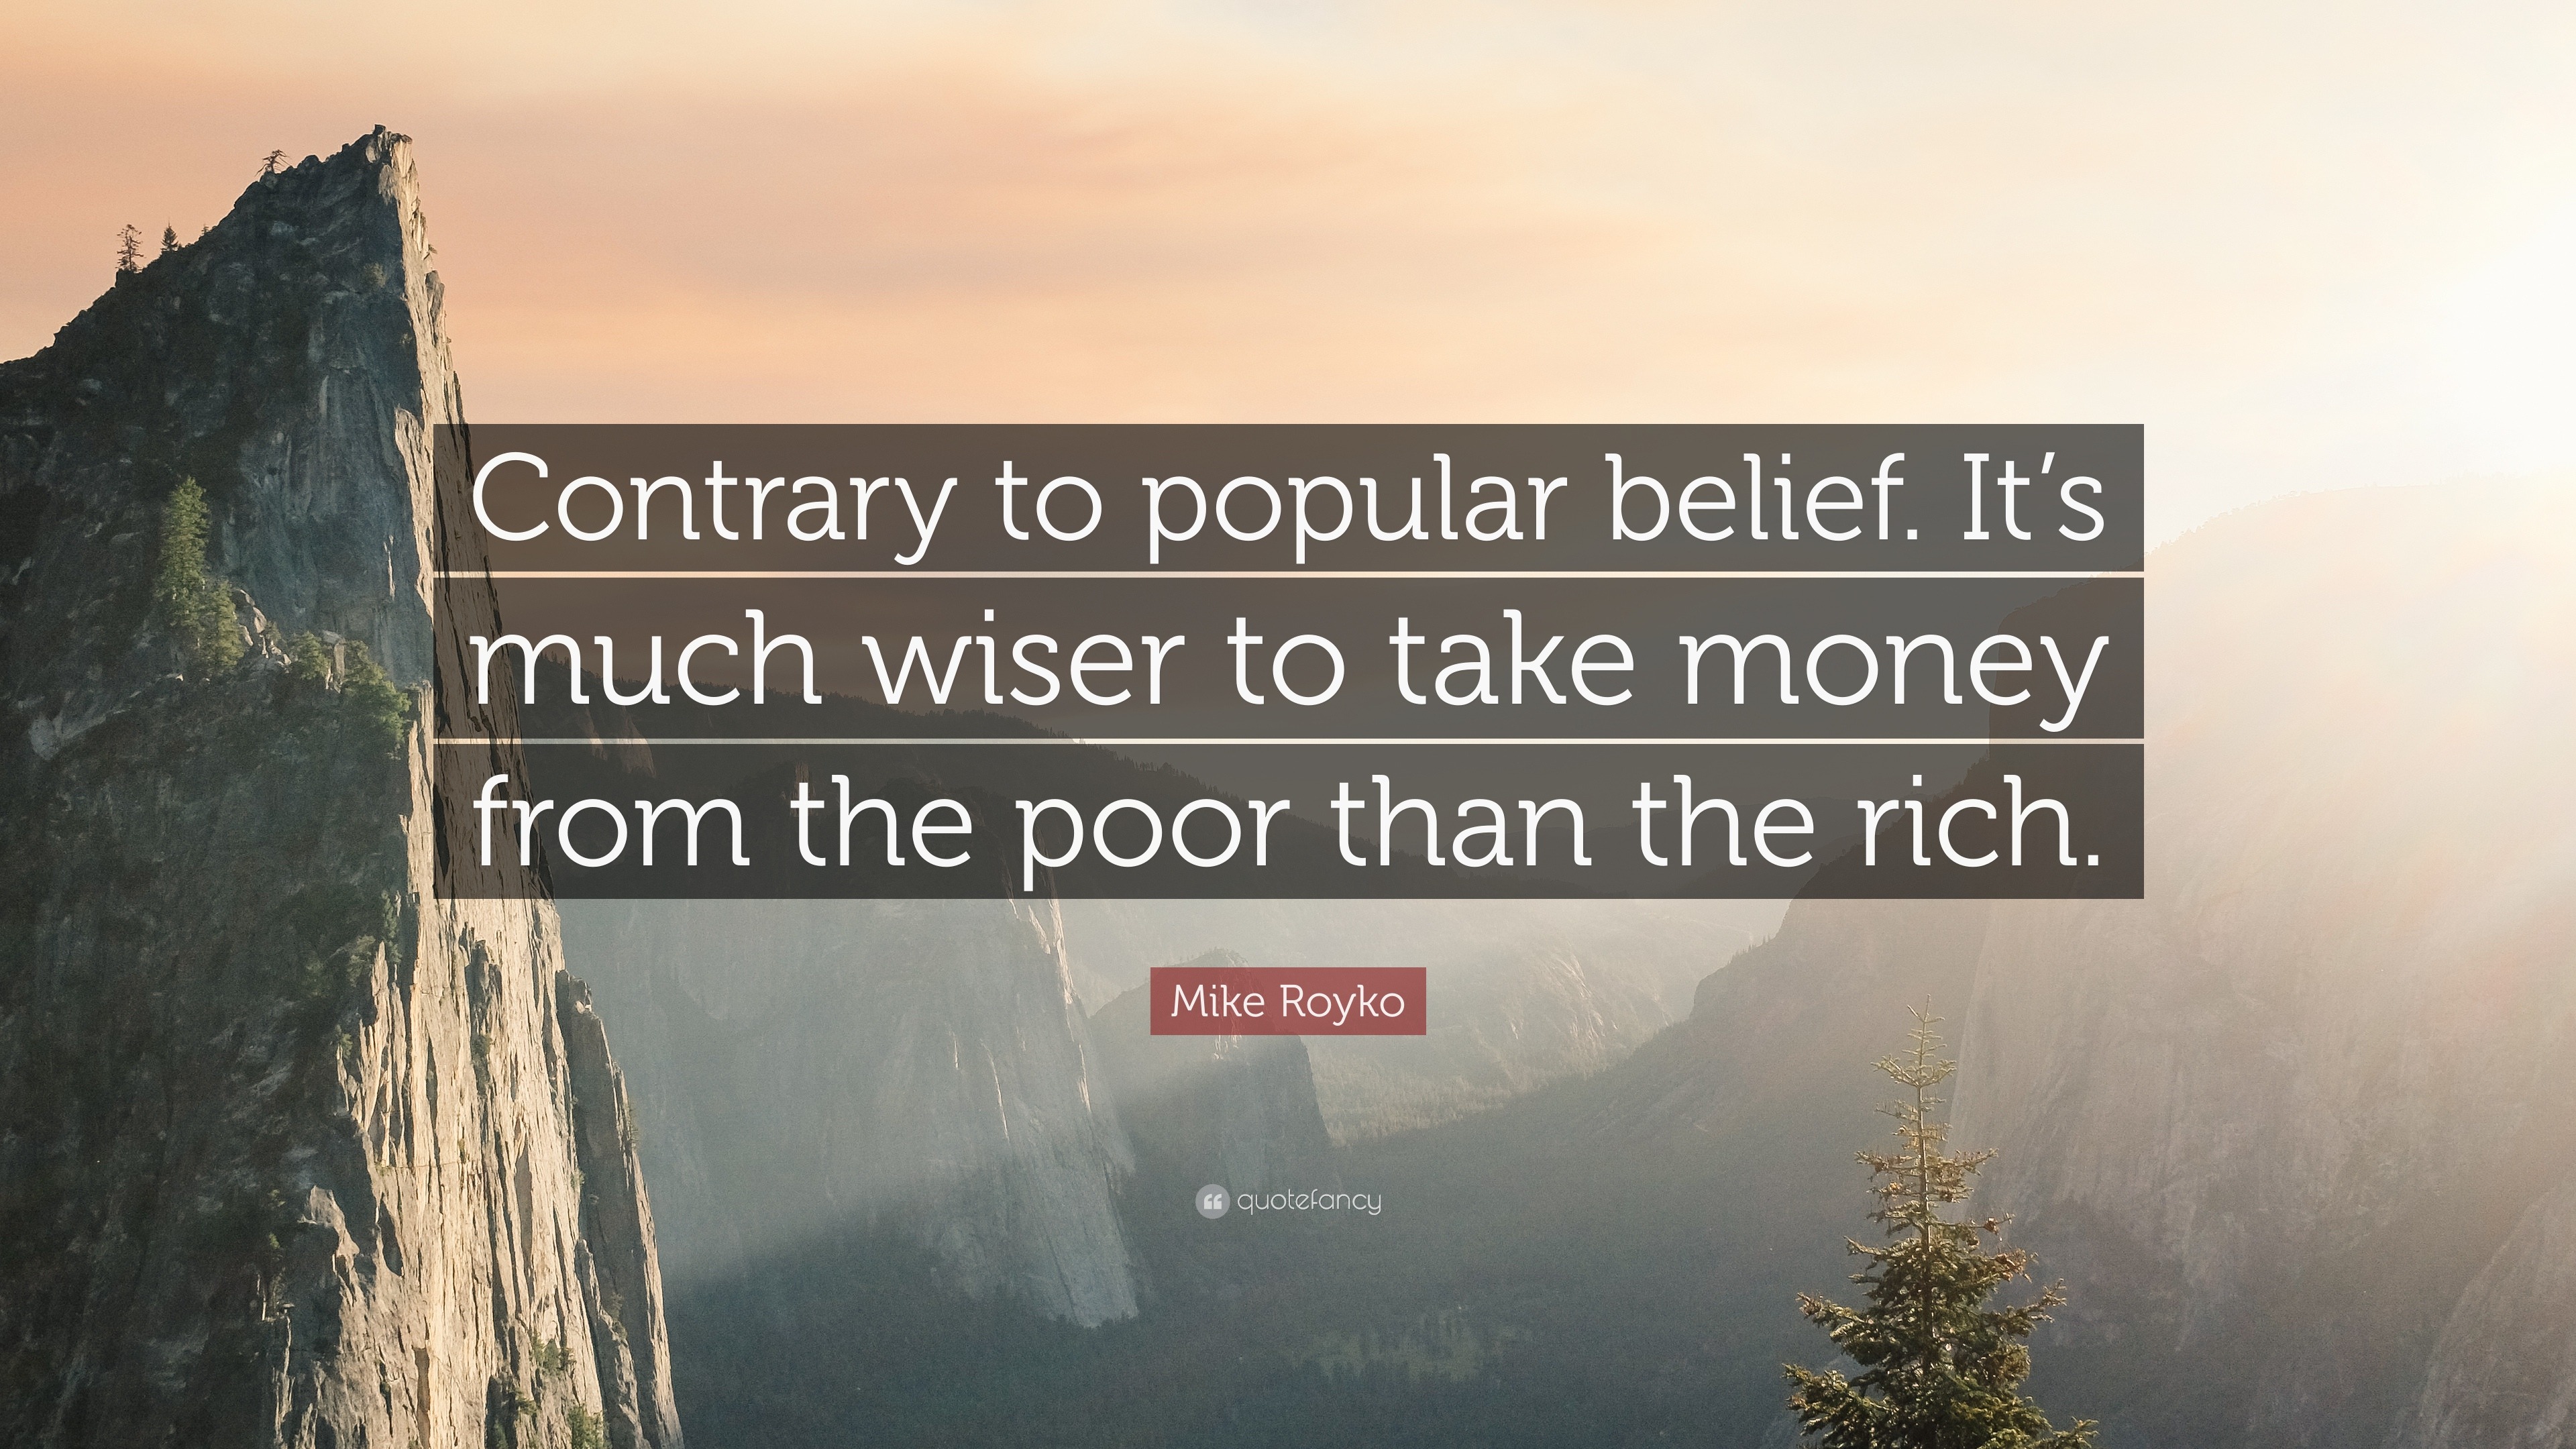 Mike Royko Quote “contrary To Popular Belief Its Much Wiser To Take